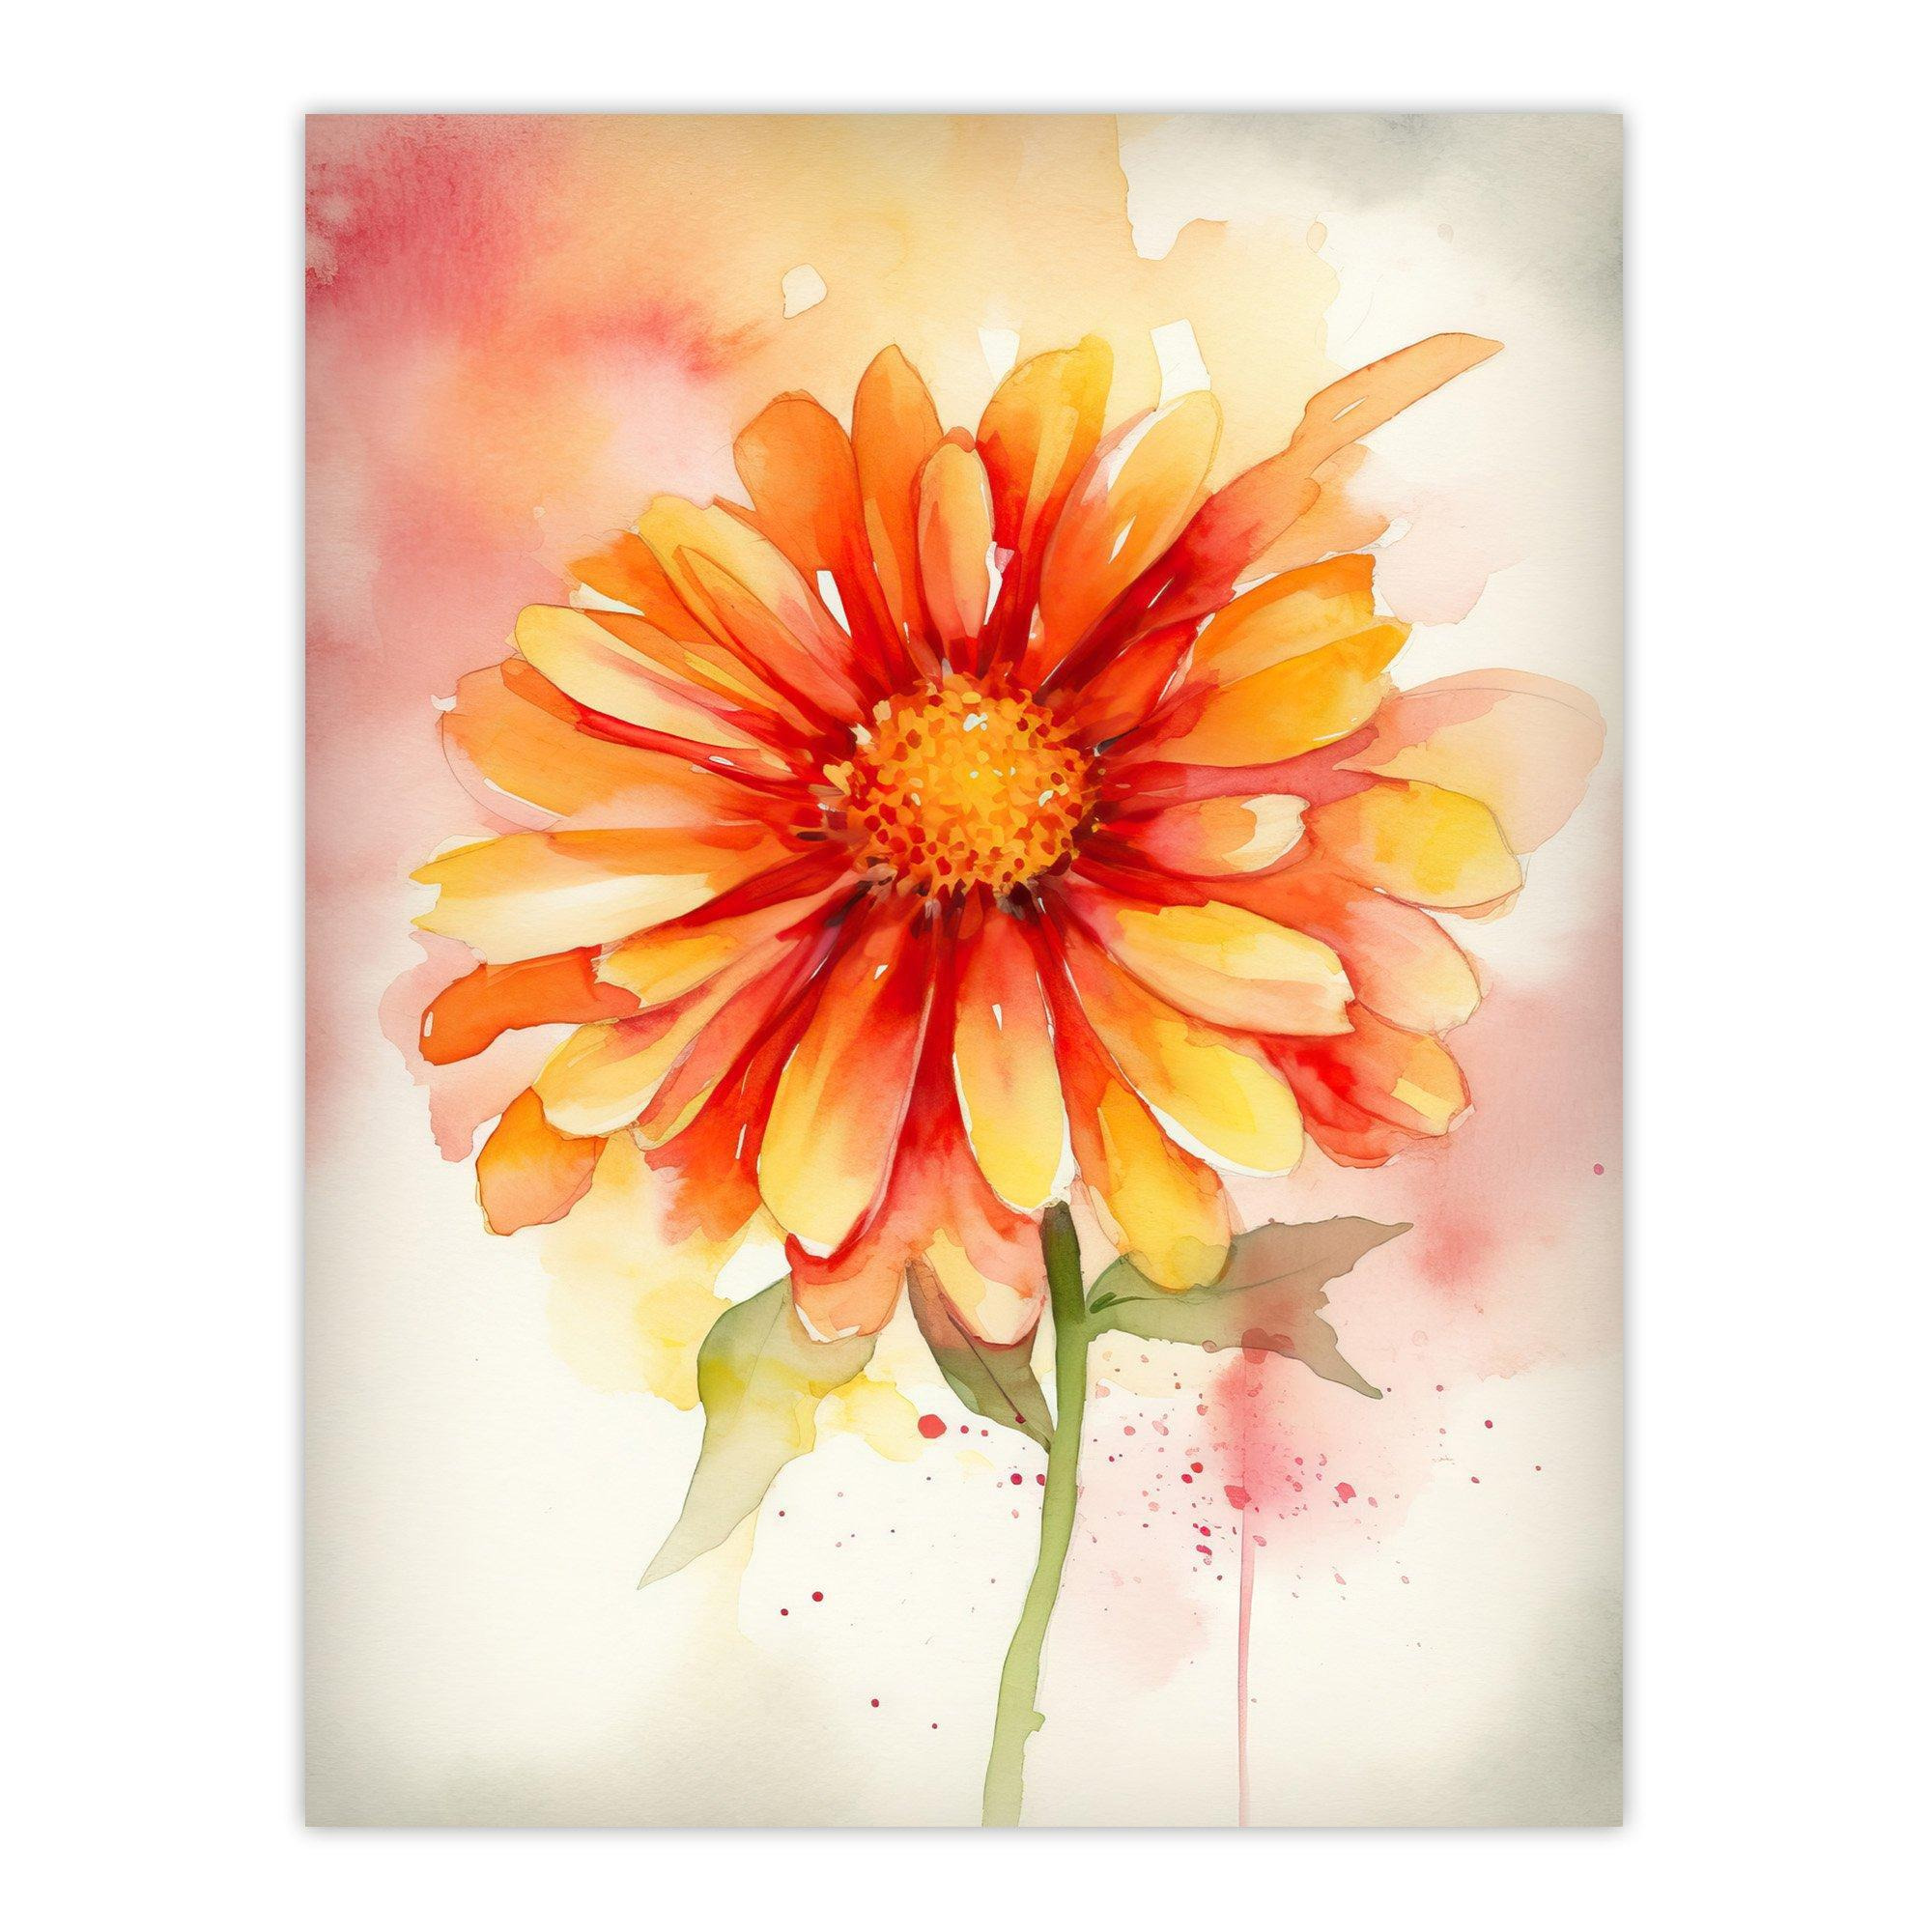 Wall Art Print A Single Gerbera Daisy Soft Watercolour Painting Pink Green Orange Spring Bloom Flower Nature Colourful Bright Floral Modern Artwork Poster - image 1